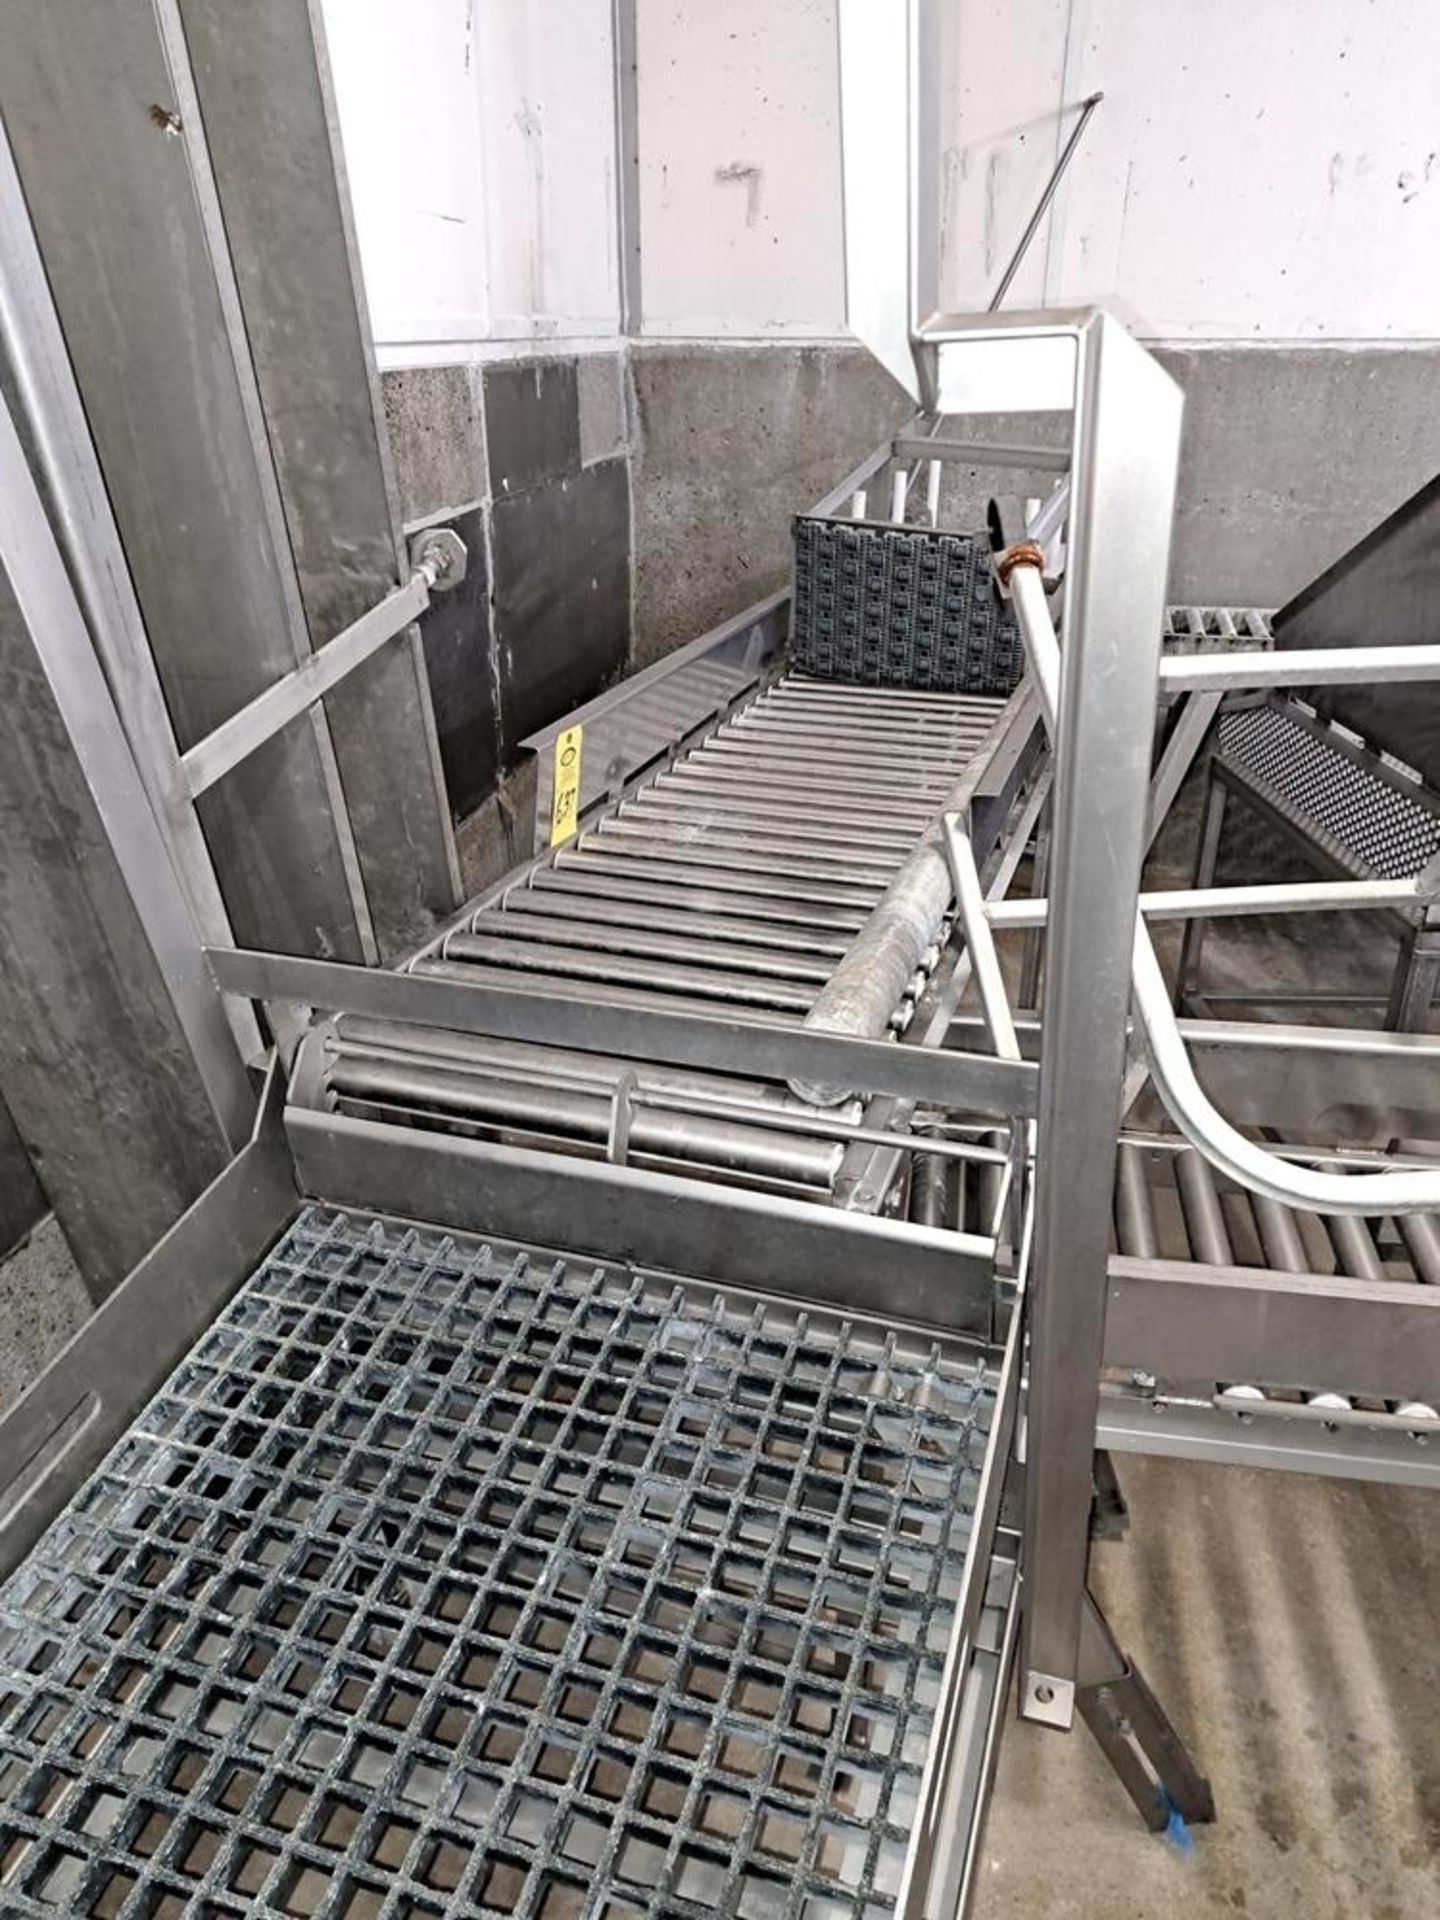 Lot Roller Conveyor, Stainless Steel Processing Bins with chutes, Stainless Steel Platform, - Image 4 of 7